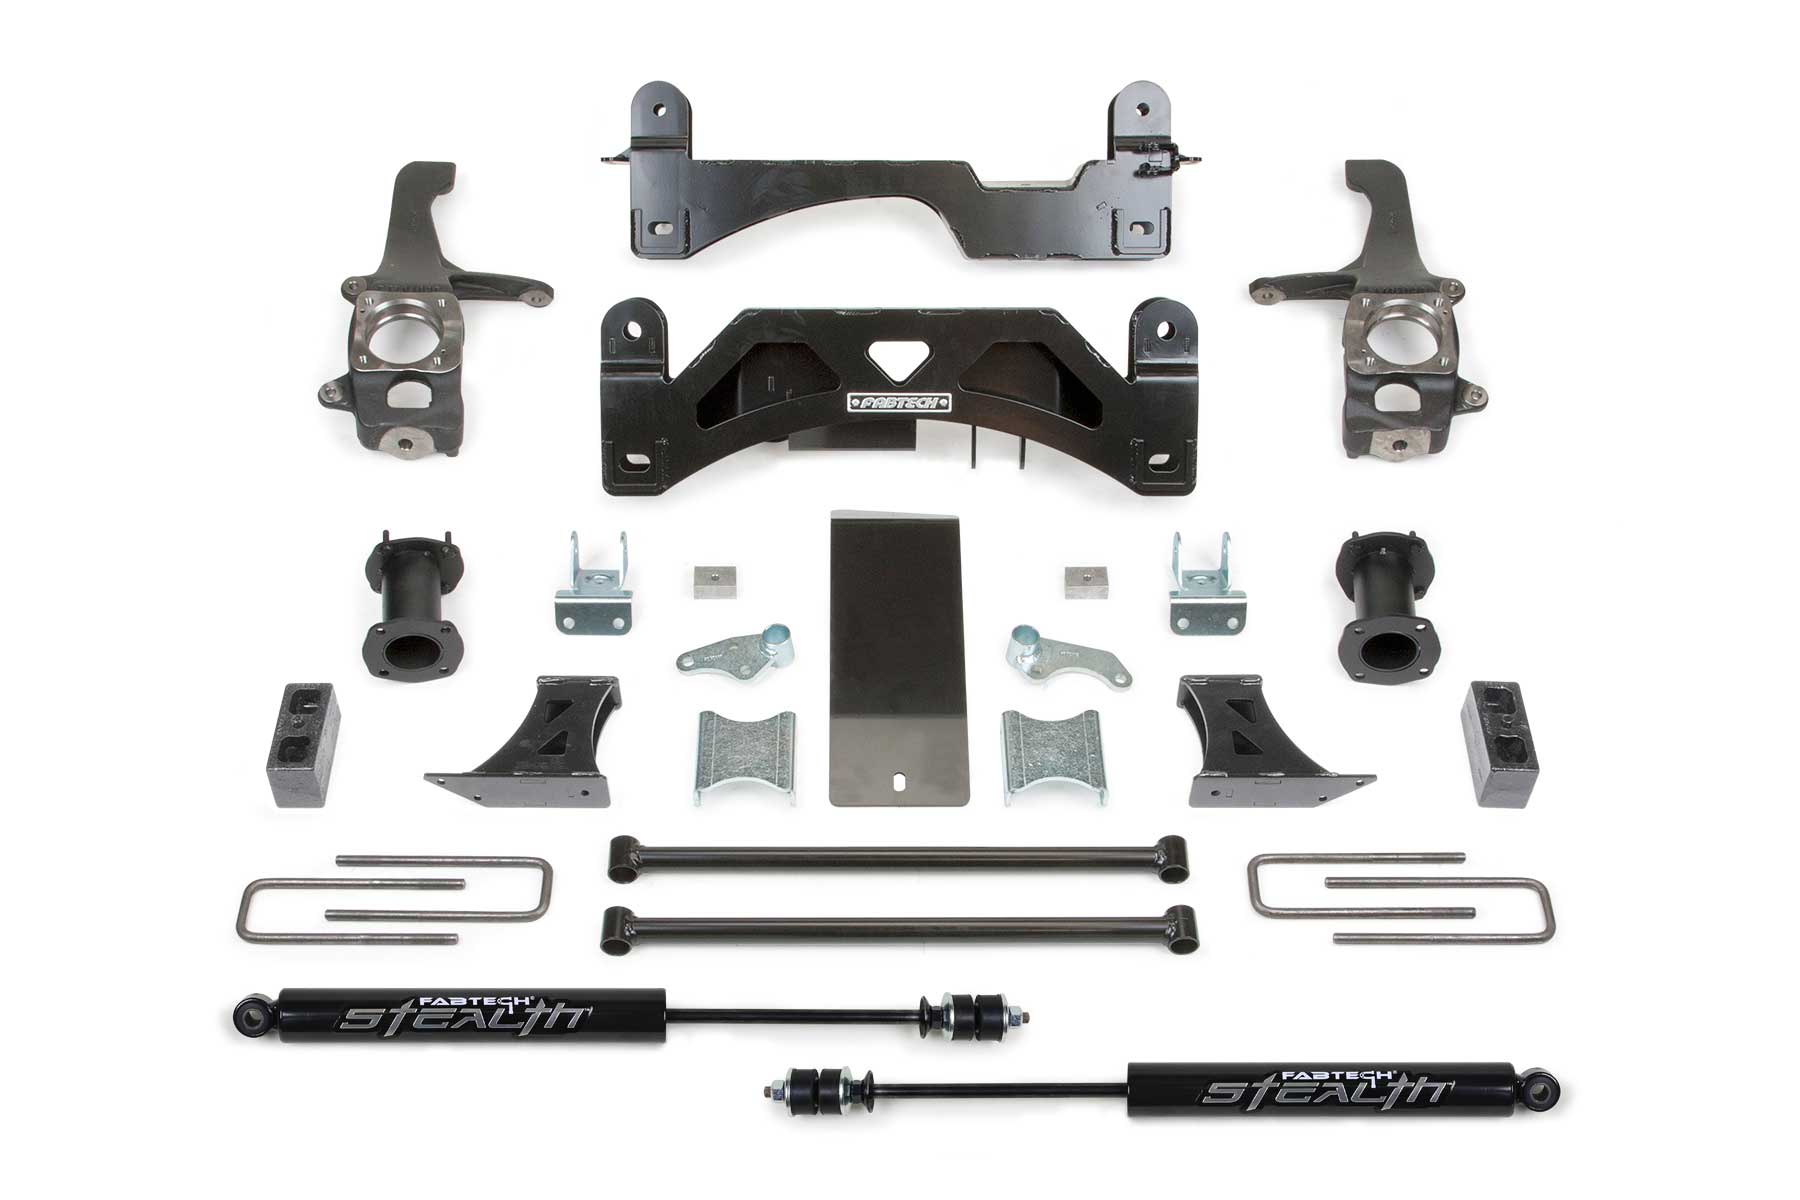 Fabtech 6″ 07-2015 BASIC SYSTEM W/ COILOVER SPACERS & REAR STEALTH SHOCKS – K7009M